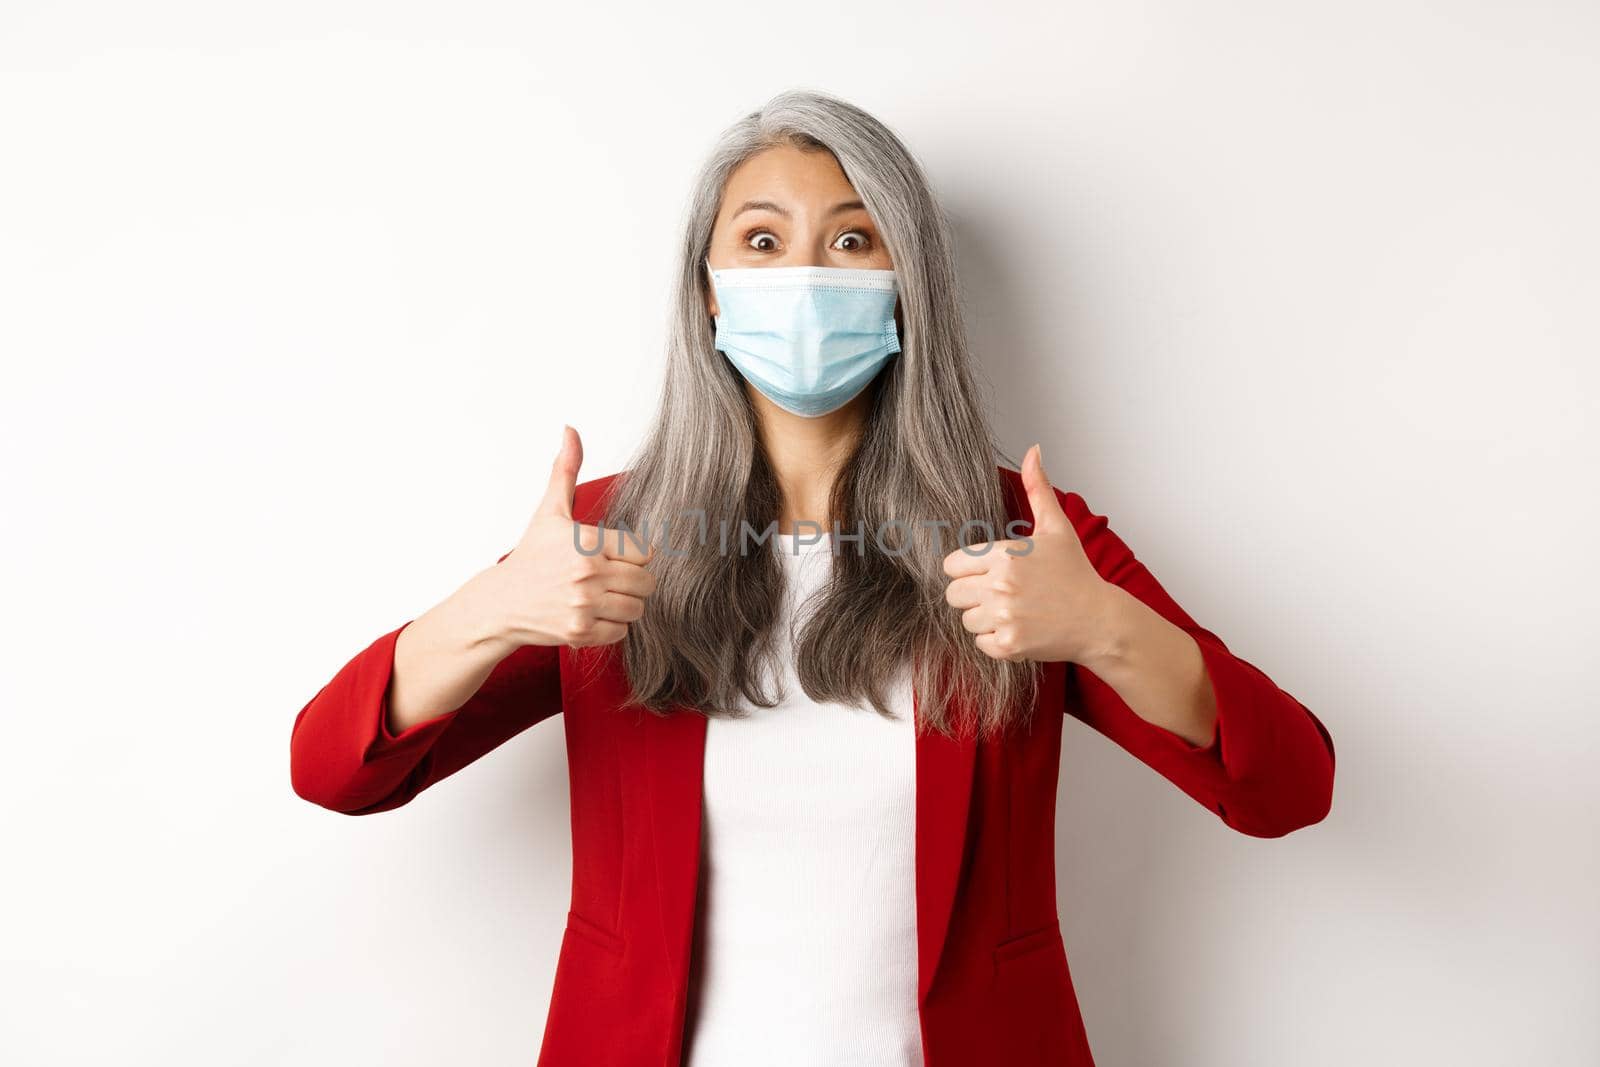 Coronavirus and business concept. Asian female manager in face mask looking cheerful, showing thumb-up in approval, white background.